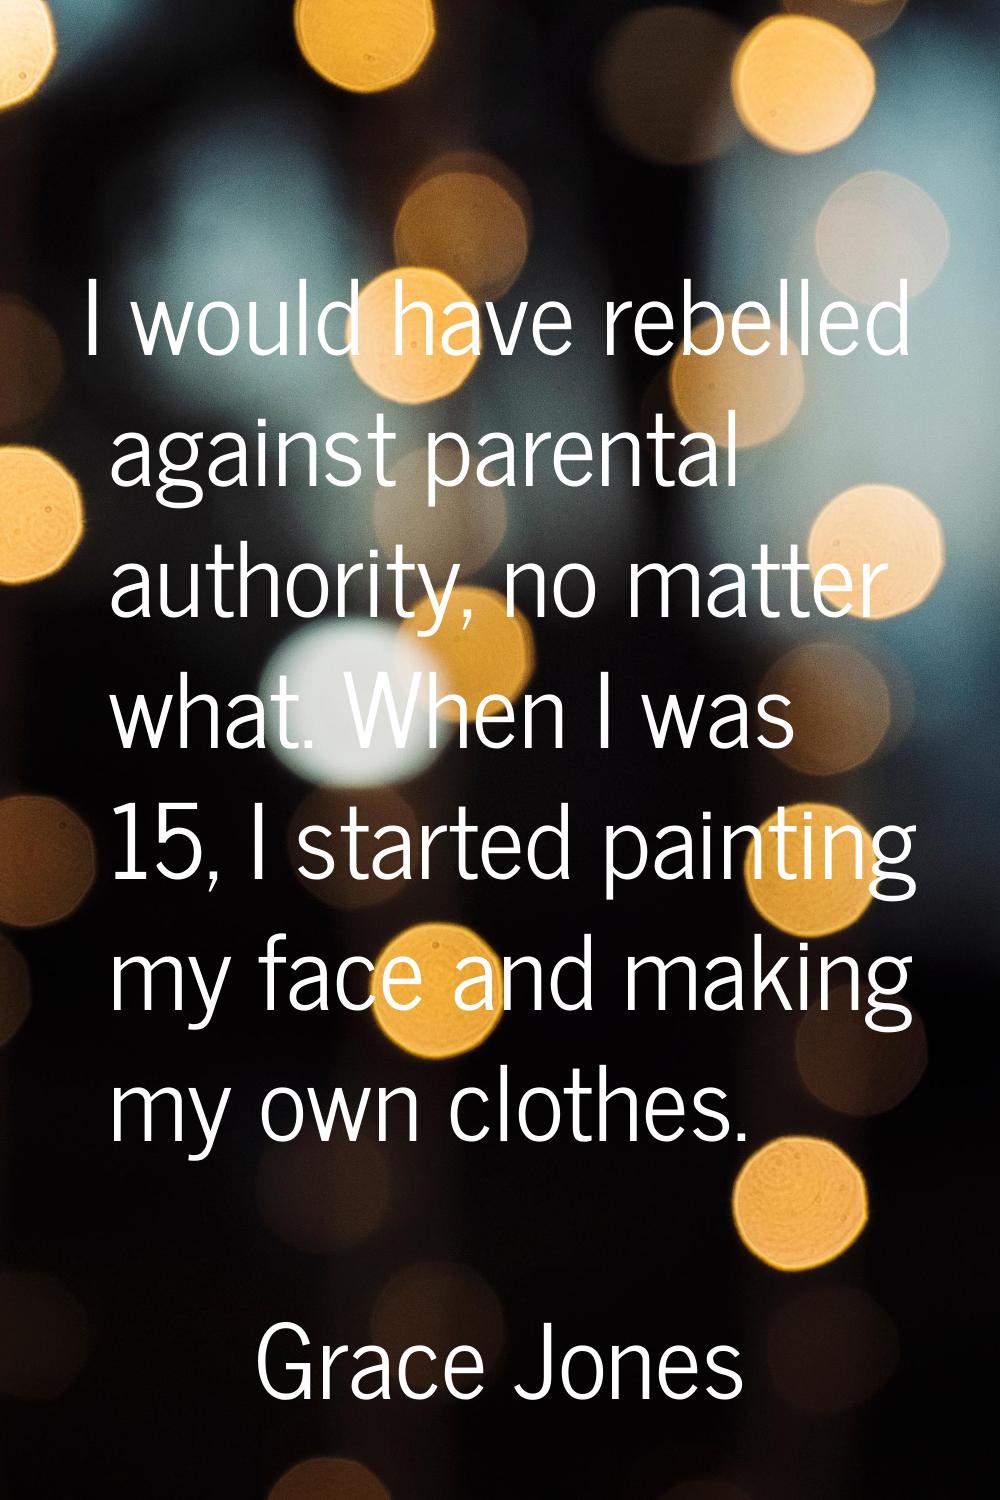 I would have rebelled against parental authority, no matter what. When I was 15, I started painting